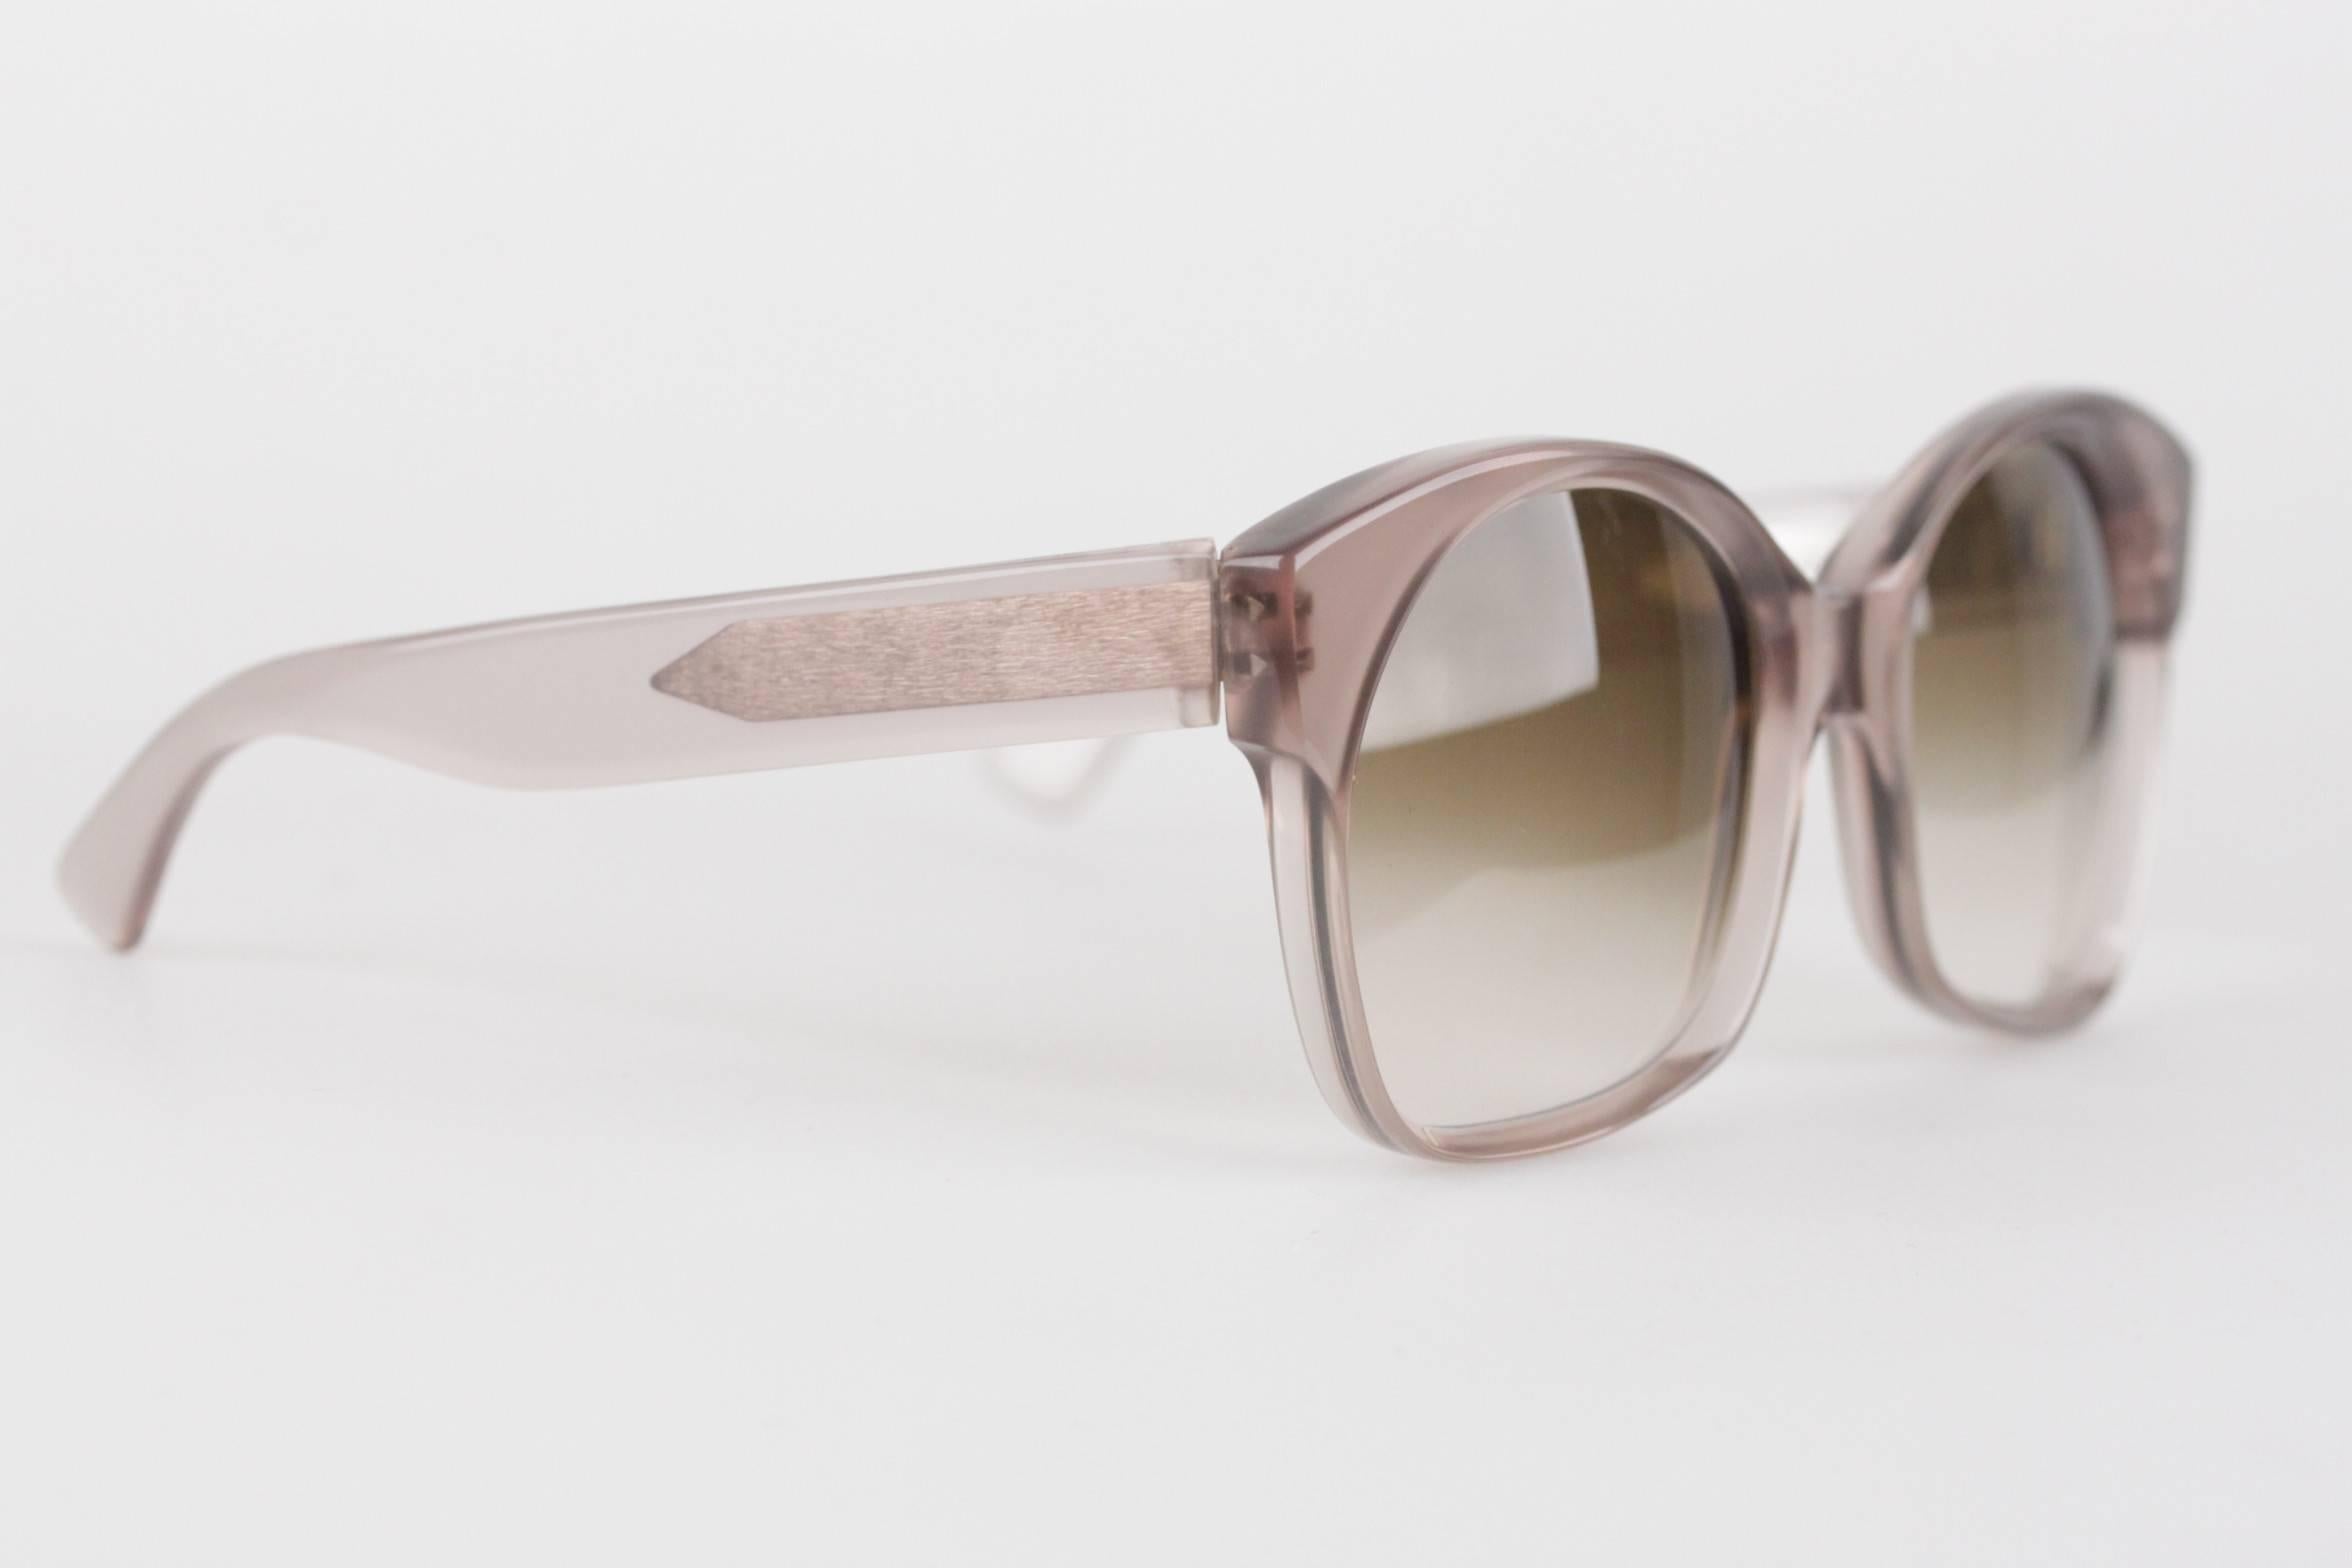 YSL, Handmade in France

Gray frame, with light BROWN GRADIENT MINT 100% UV lens

Mod. AGRIAS - 52/22

Condition:  A+ :MINT CONDITION! Mint item. Never worn or used

Approximate measurements in mm's:

- TEMPLE LENGTH: 125 m

- TEMPLE TO